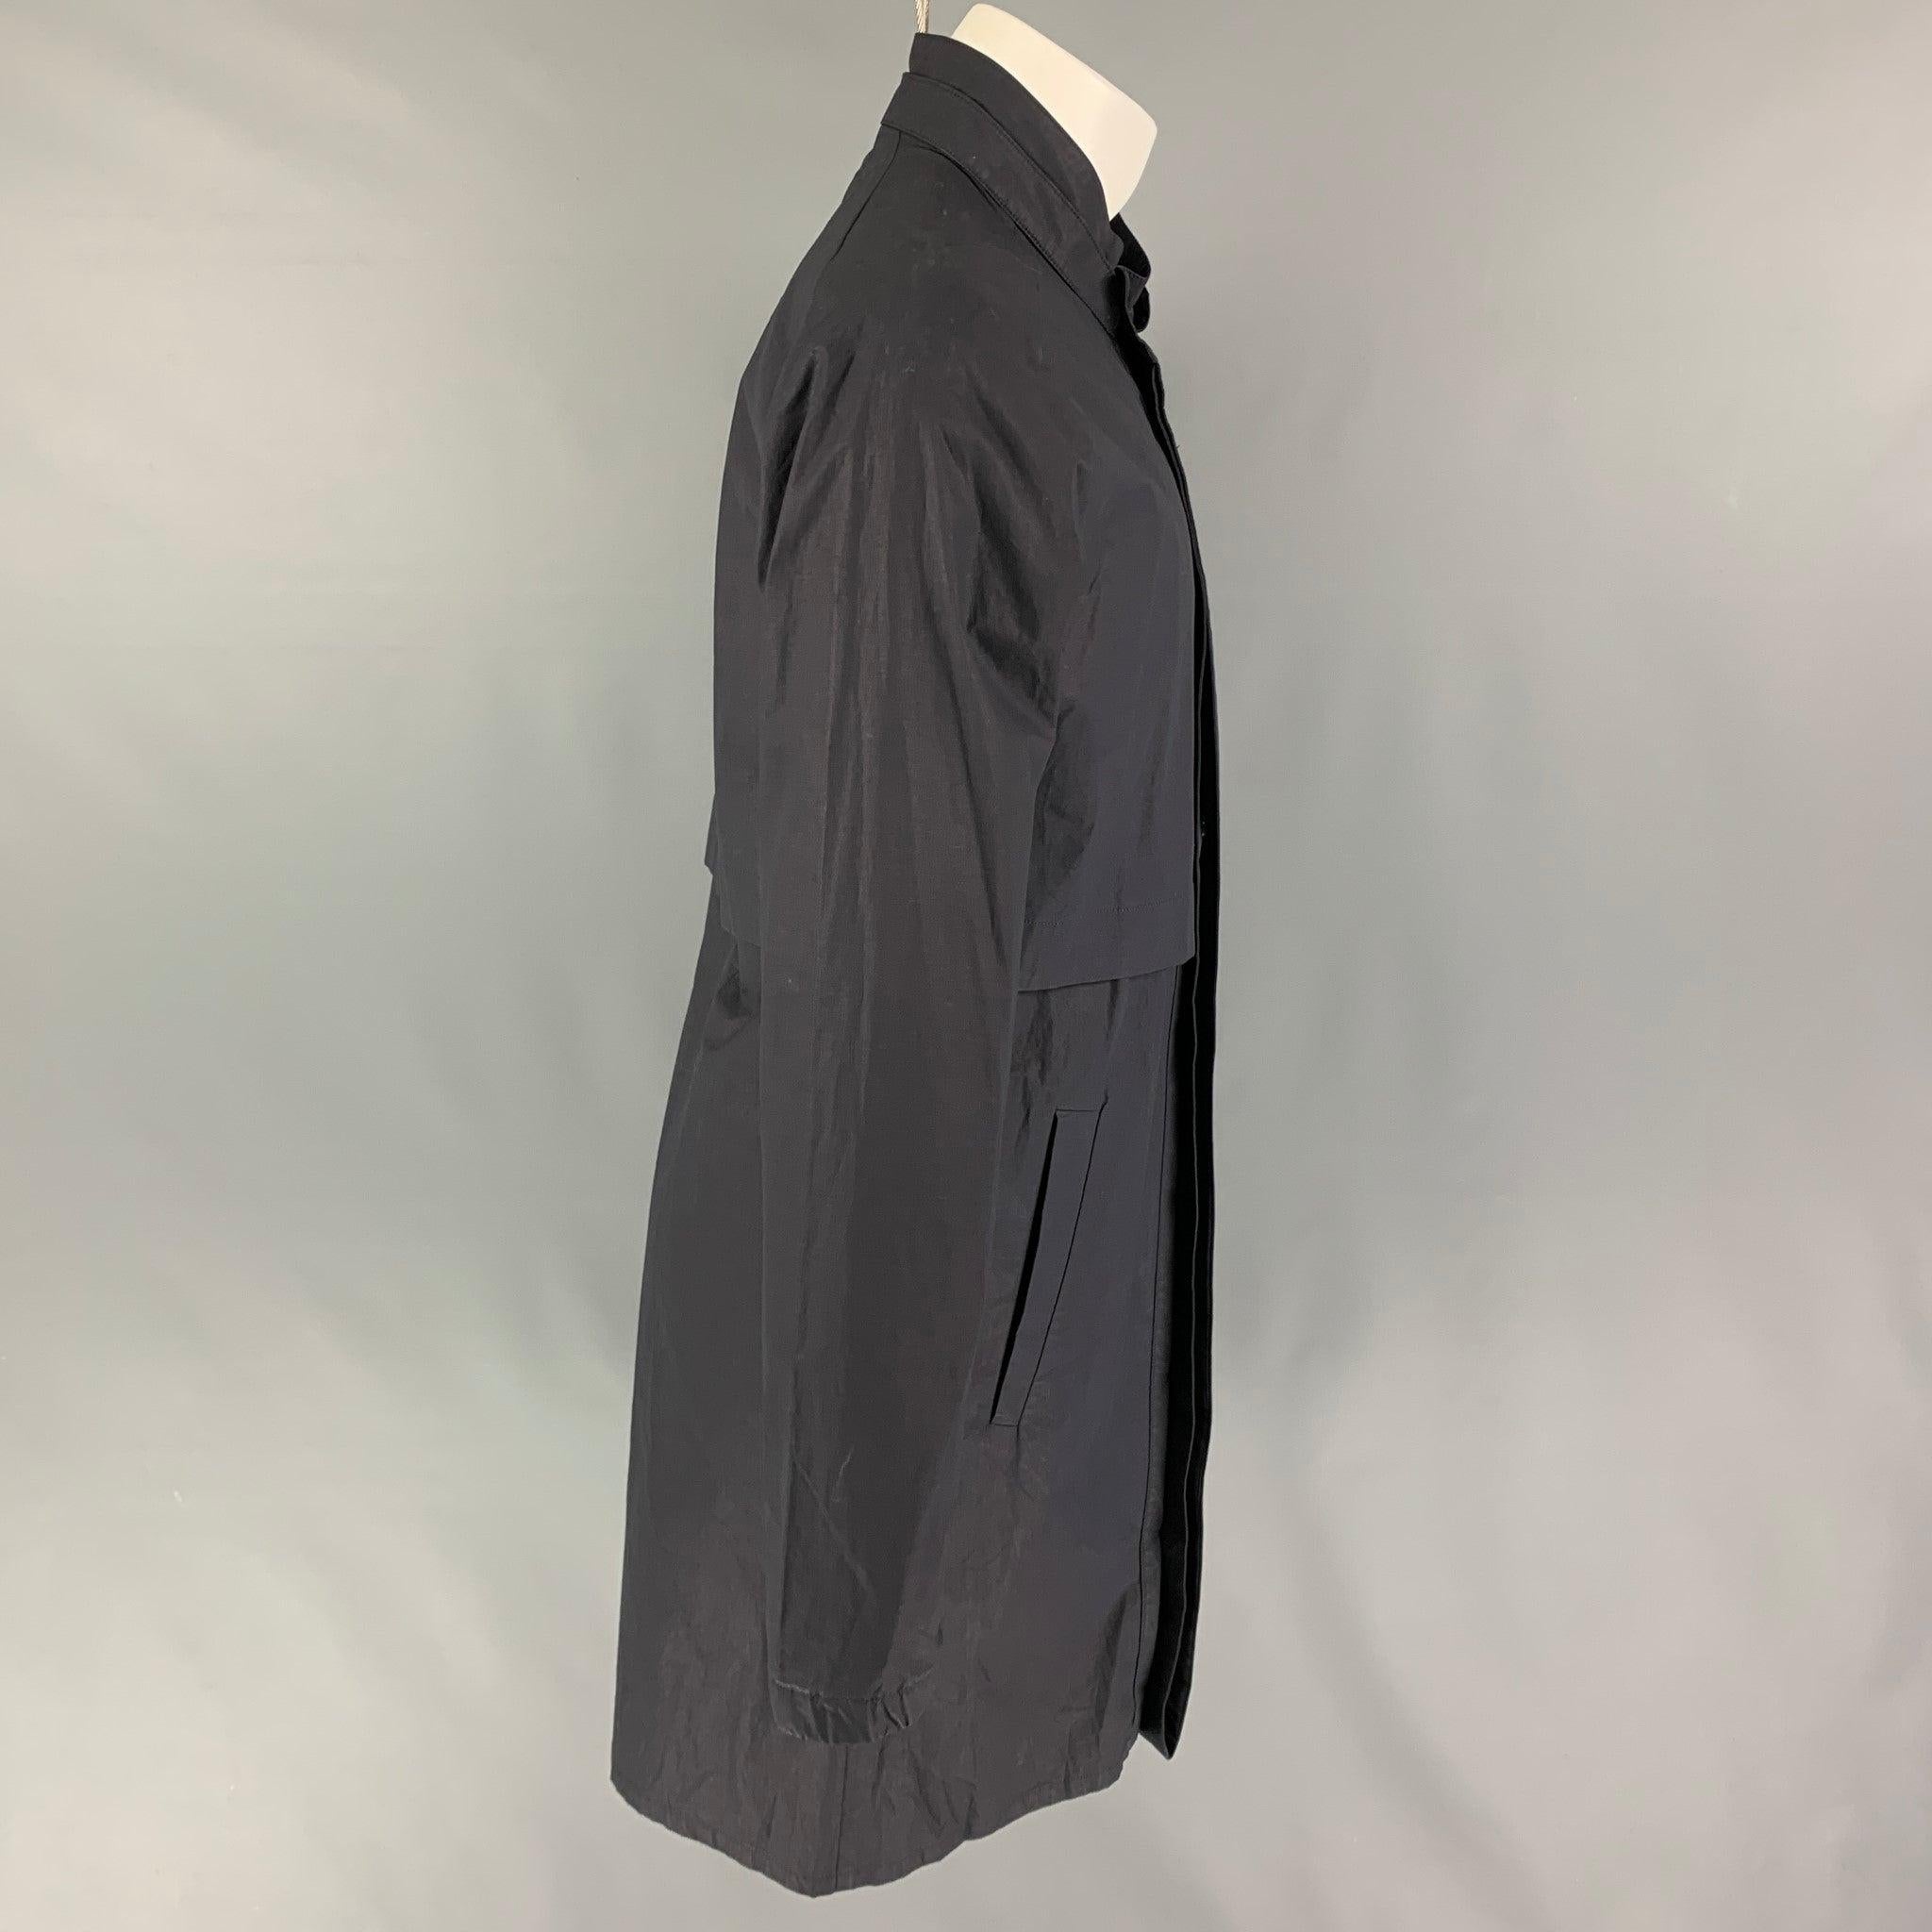 RAF SIMONS Spring-Summer 2008 coat comes in a slate cotton featuring a stand up collar, slit pockets, single back vent, and a hidden zip & buttoned closure. Made in Romania.
Very Good
Pre-Owned Condition. 

Marked:  50 

Measurements: 
 
Shoulder: